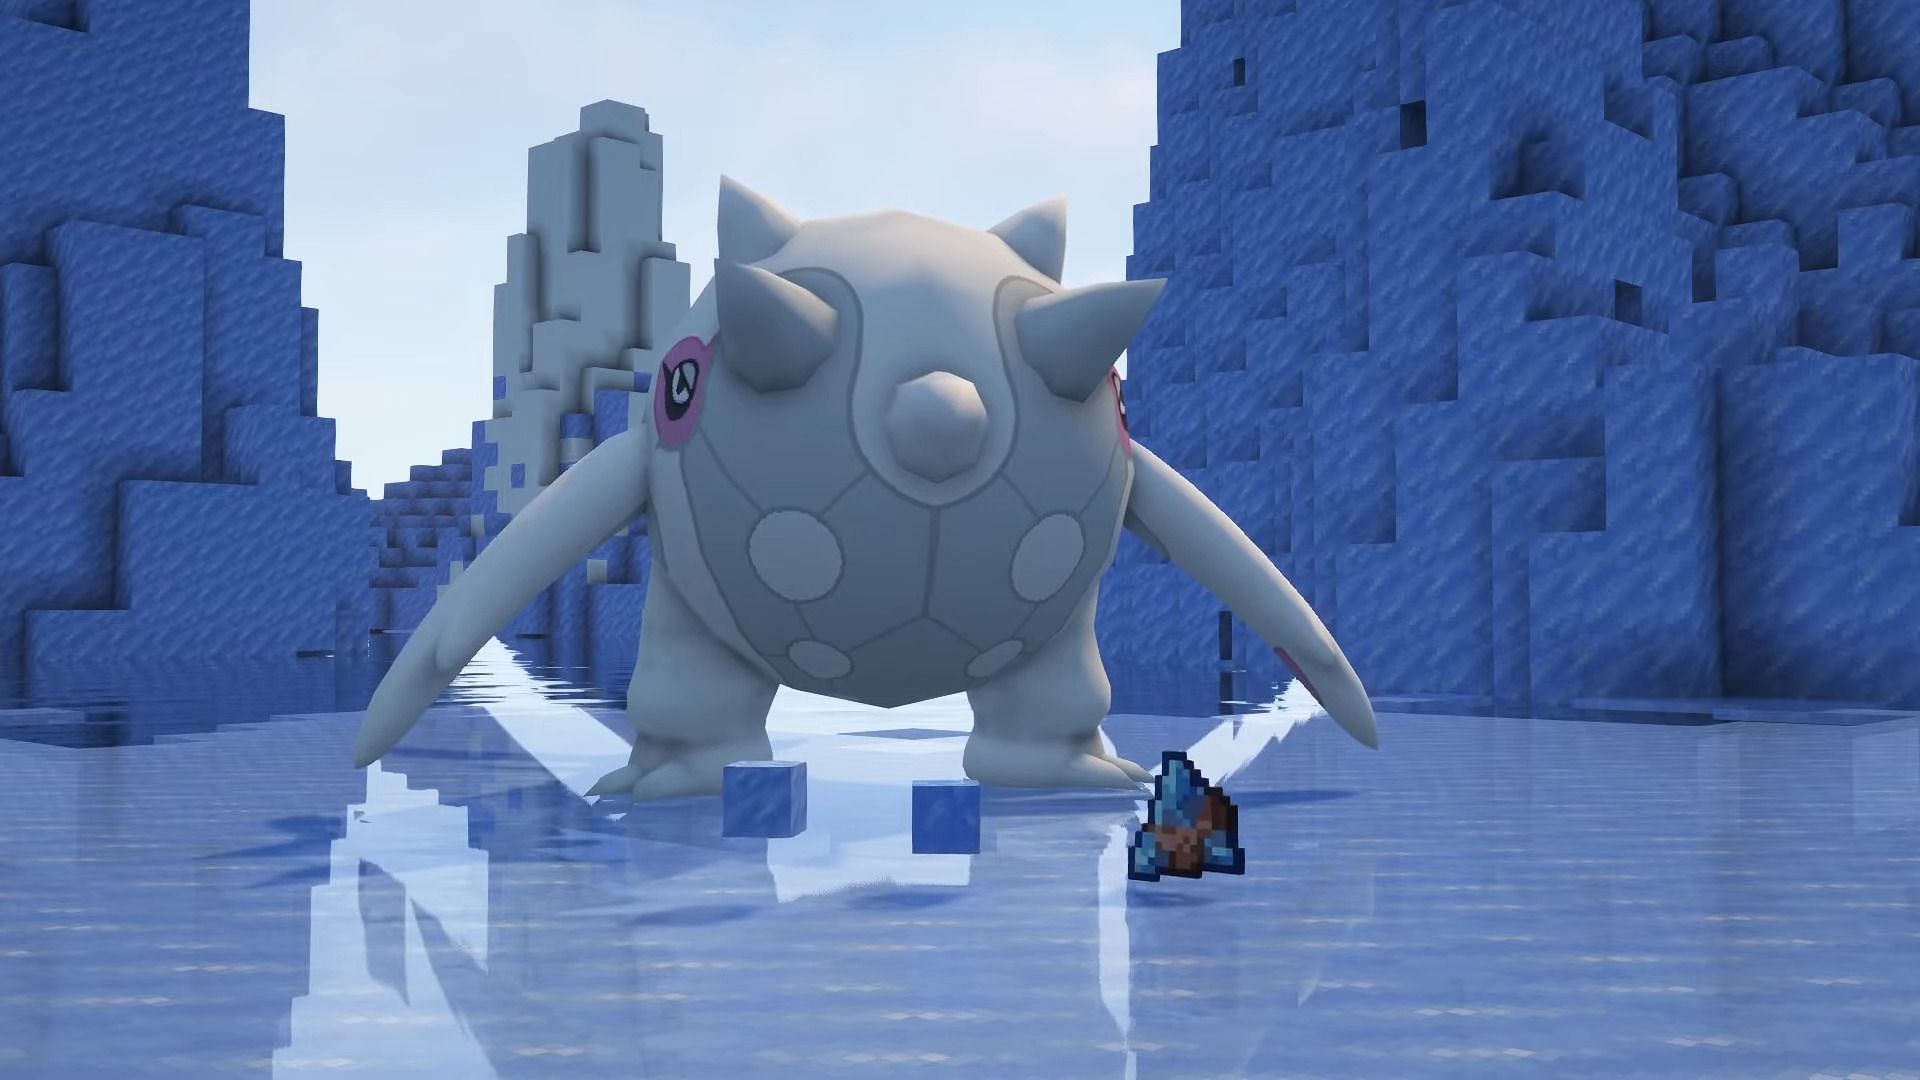 The Pokemon Cetitan as it appears in the Pixelmon mod for Minecraft (Image via PixelSnax/YouTube)